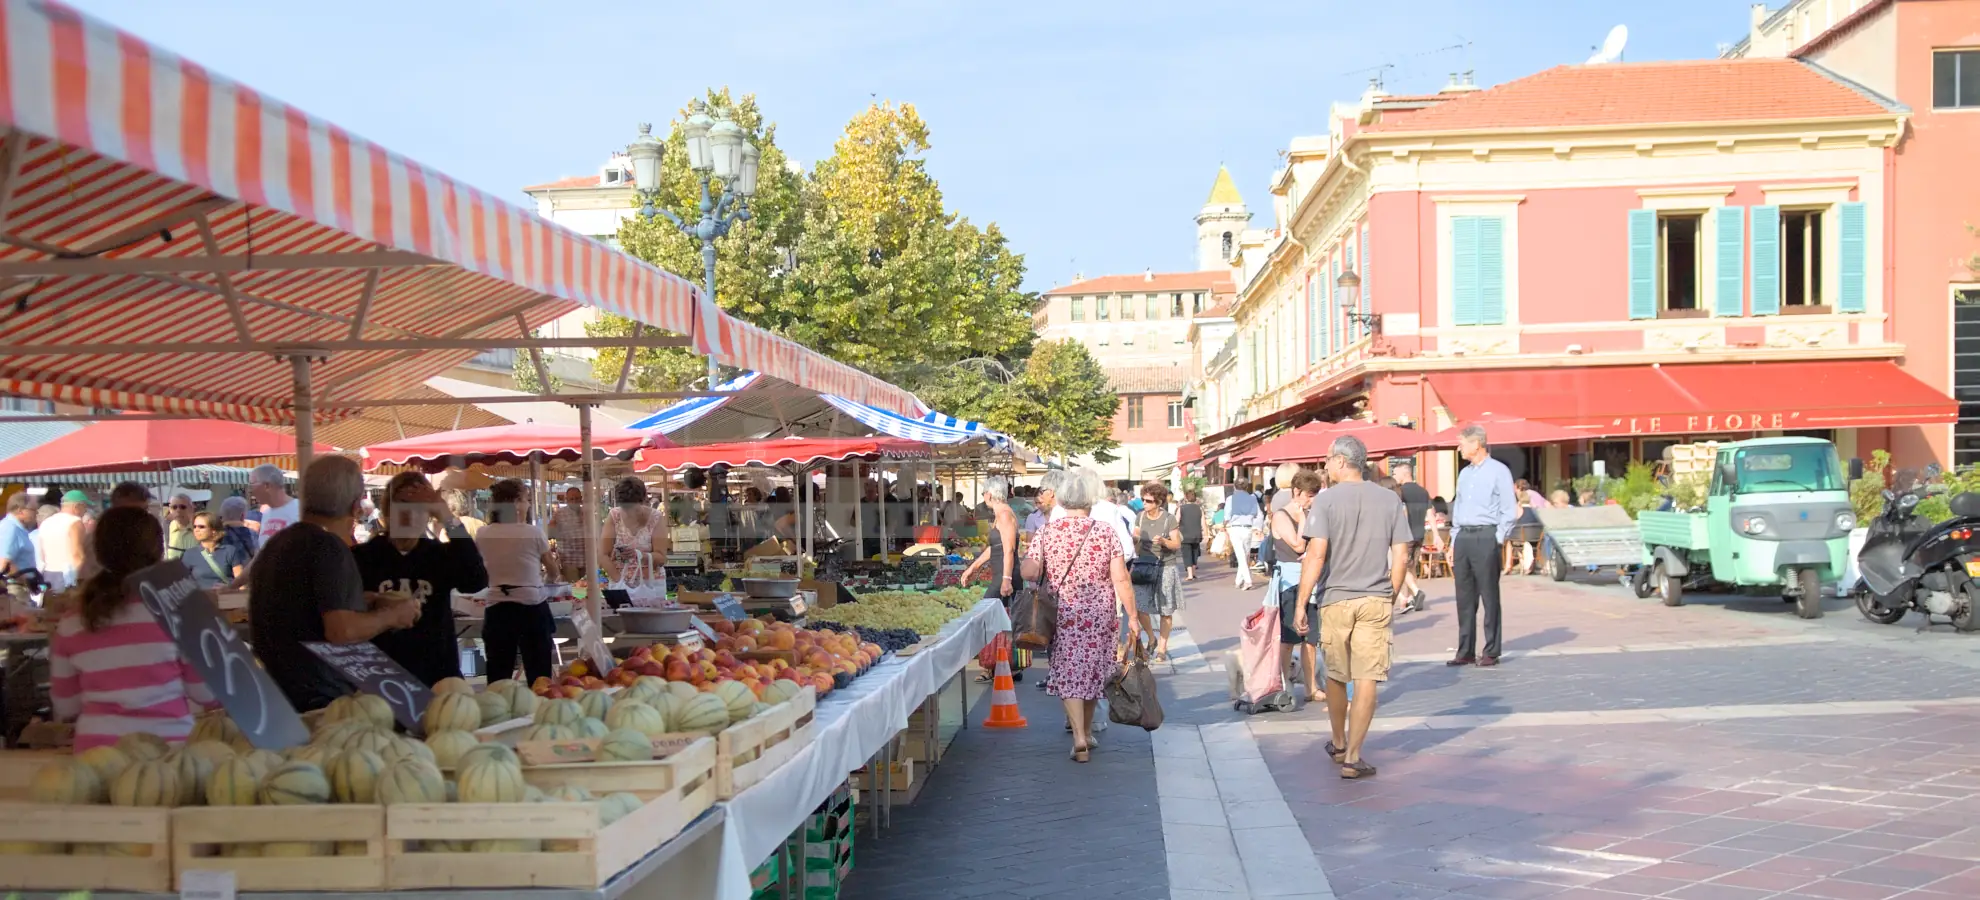 South of France typical farmers market in the morning